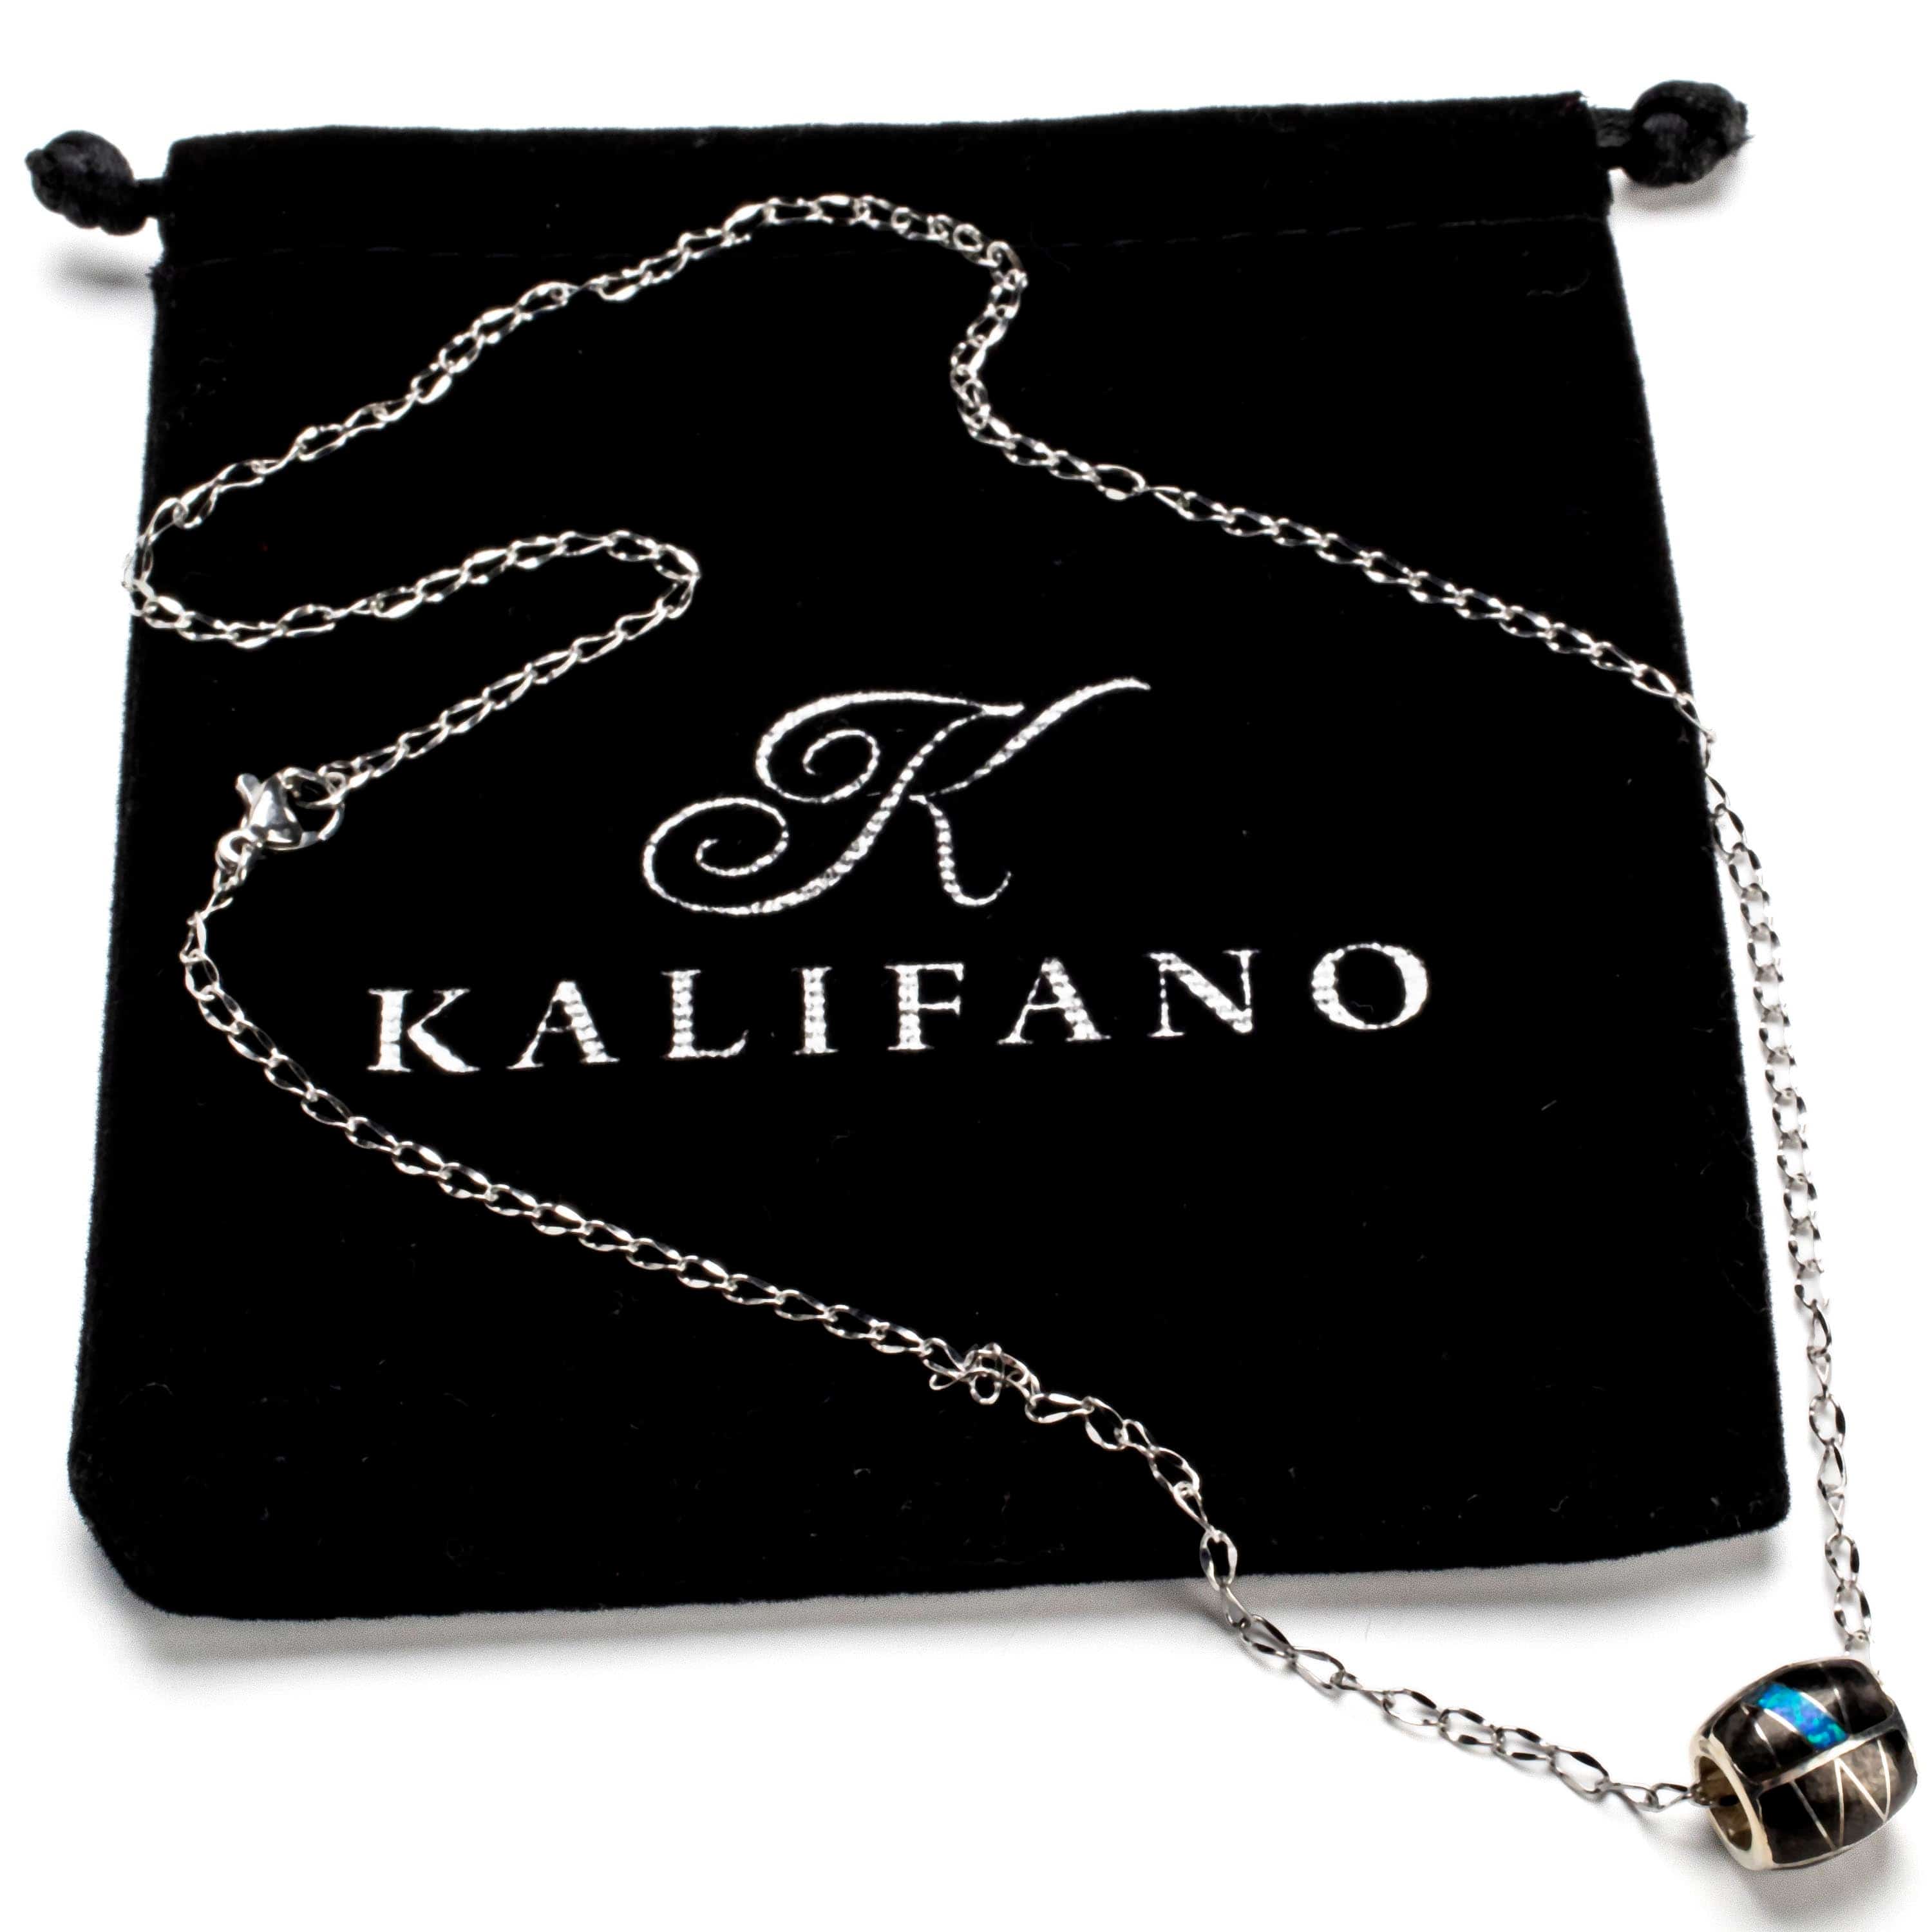 Kalifano Southwest Silver Jewelry Black Onyx Pendant Handmade with Sterling Silver and Aqua Opal Accent NMN.0570.BO